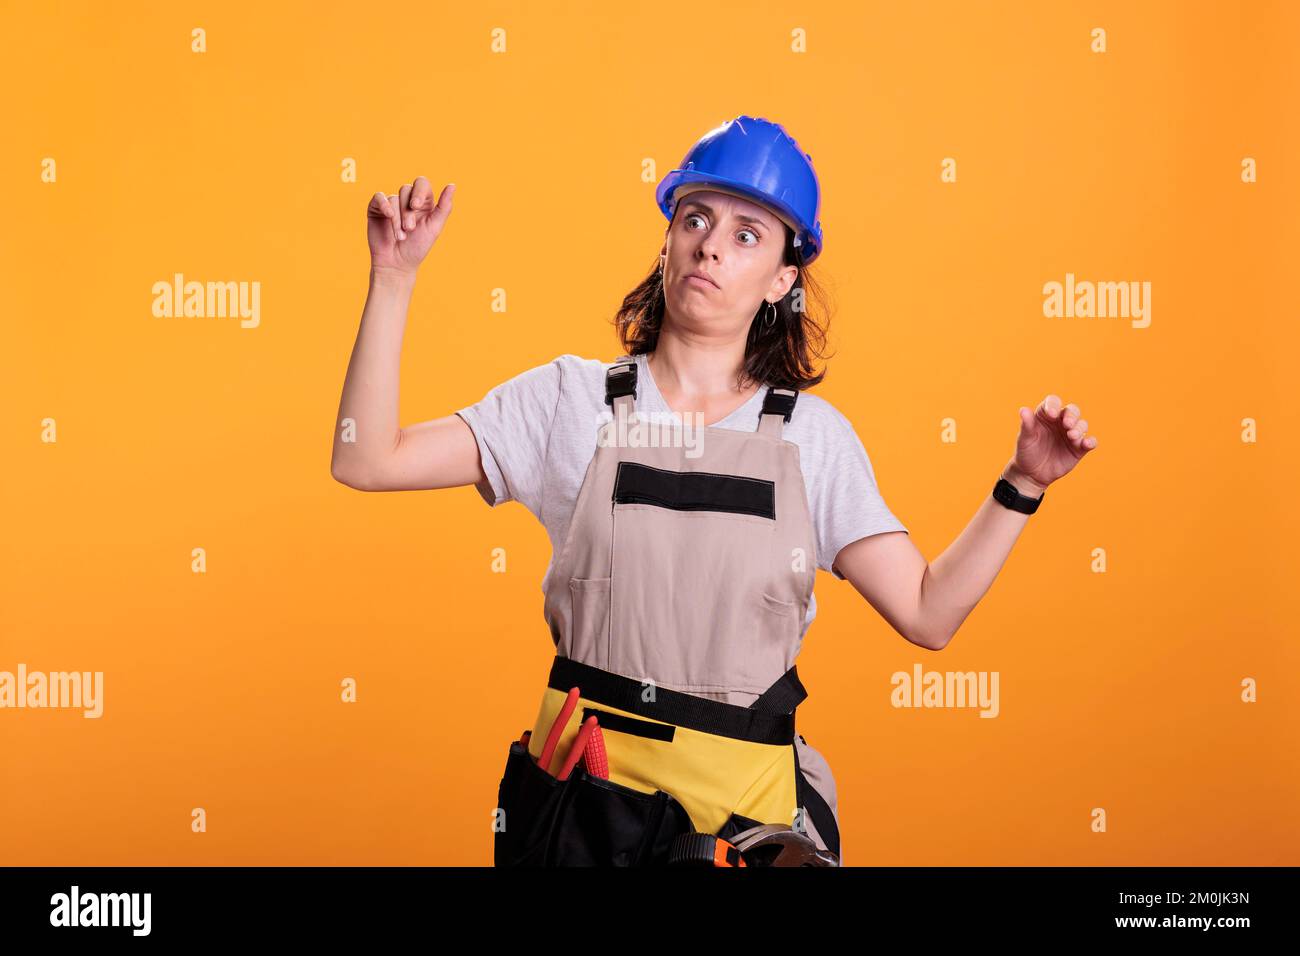 Woman engineering constructor acting dizzy and tired, standing over yellow background and losing balance. Young contractor builder experiencing dizziness and being thoughtful, studio shot. Stock Photo